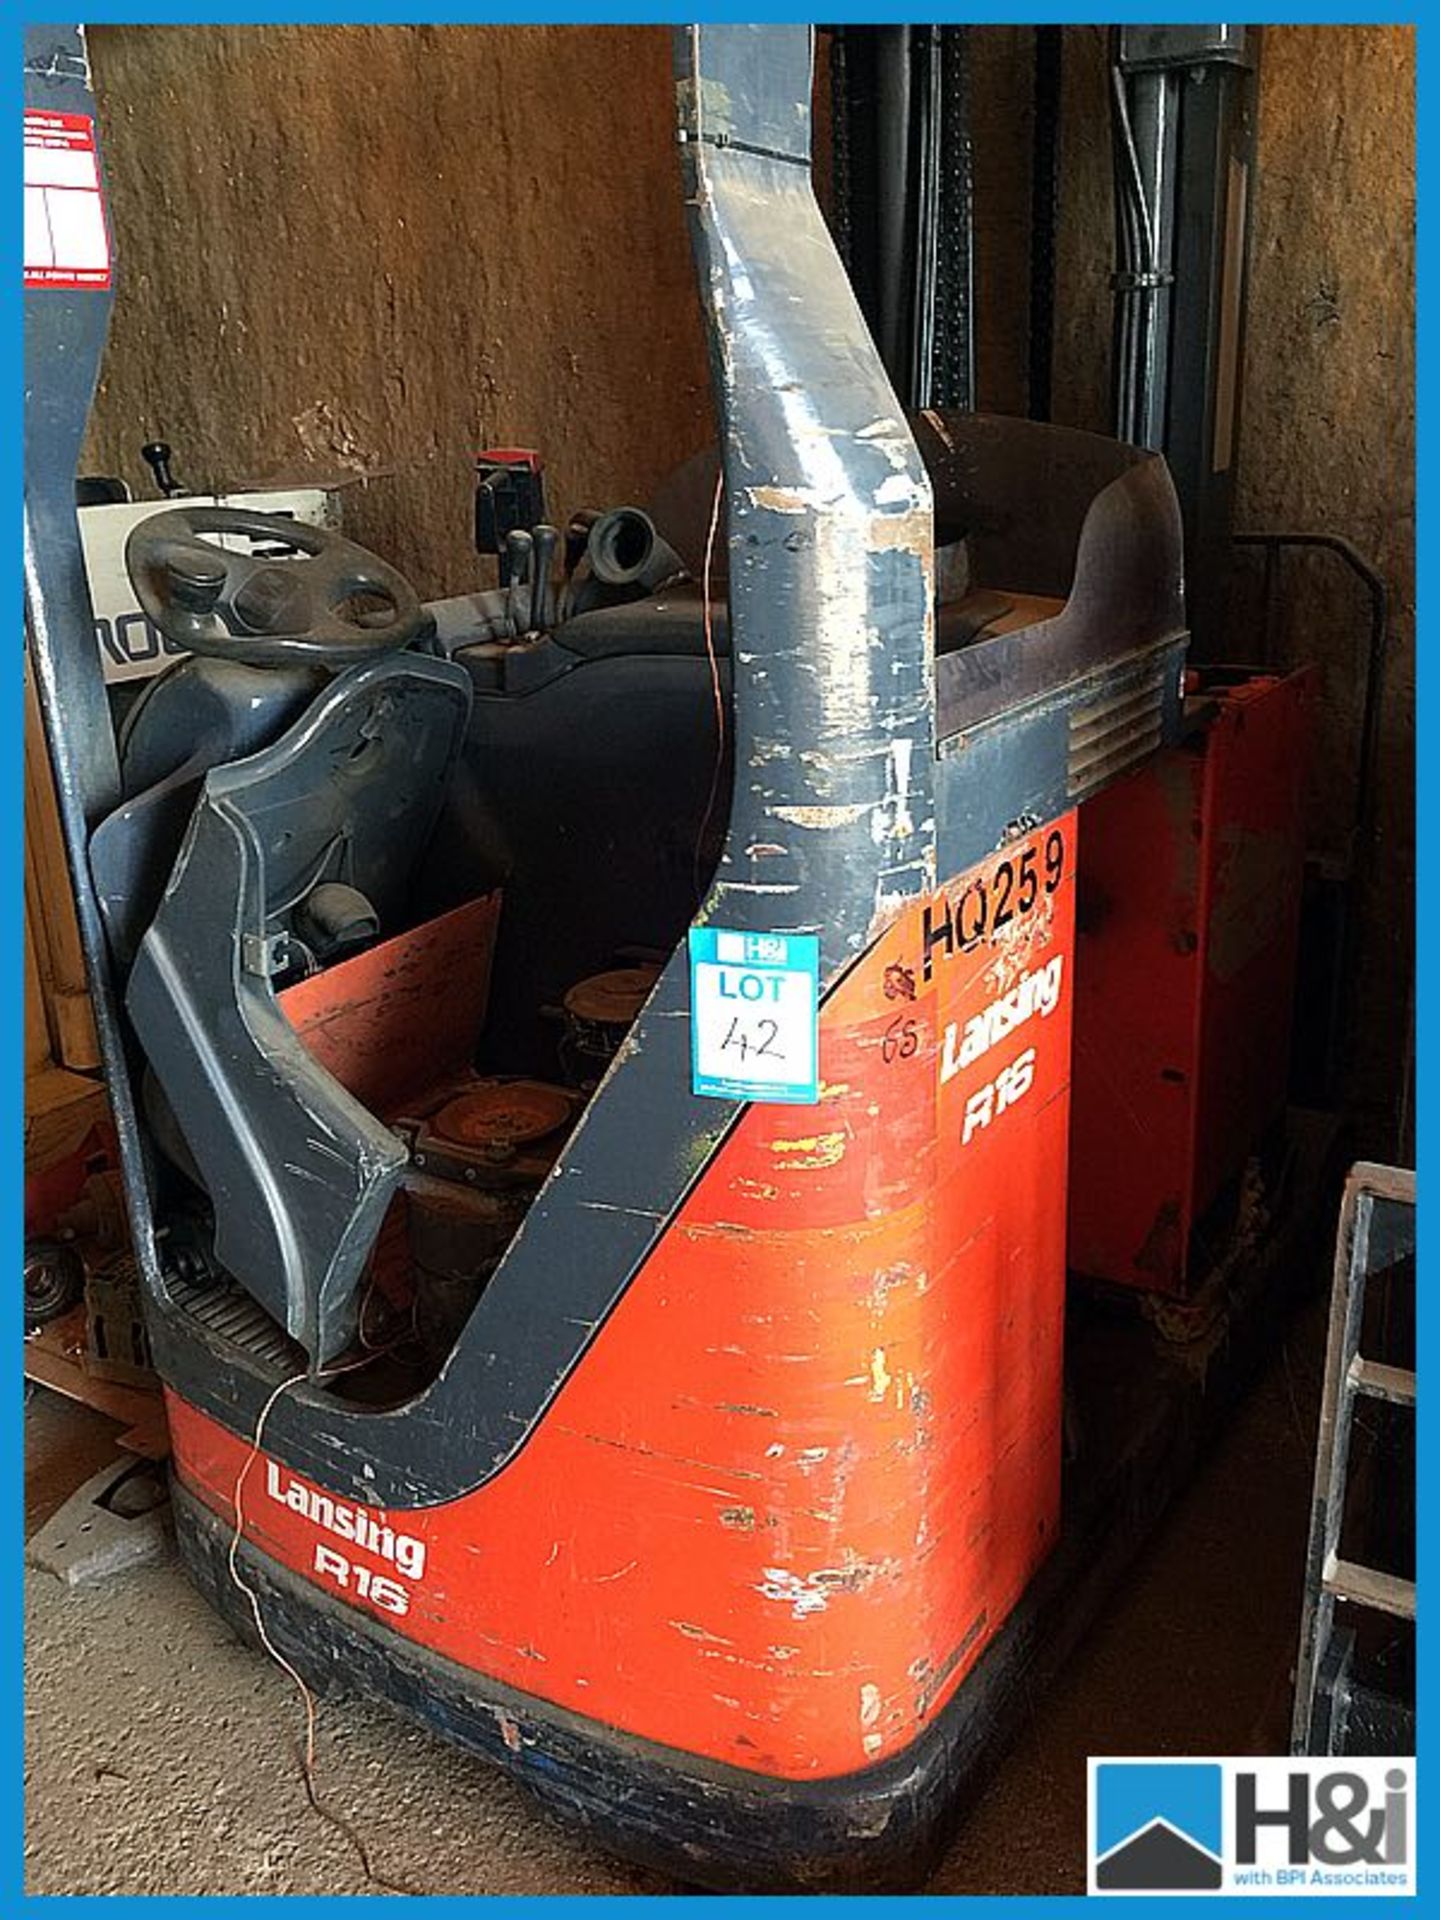 Lansing reach truck non runner model R16 Appraisal: Good Serial No: NA Location: Fenland Auction - Image 3 of 3